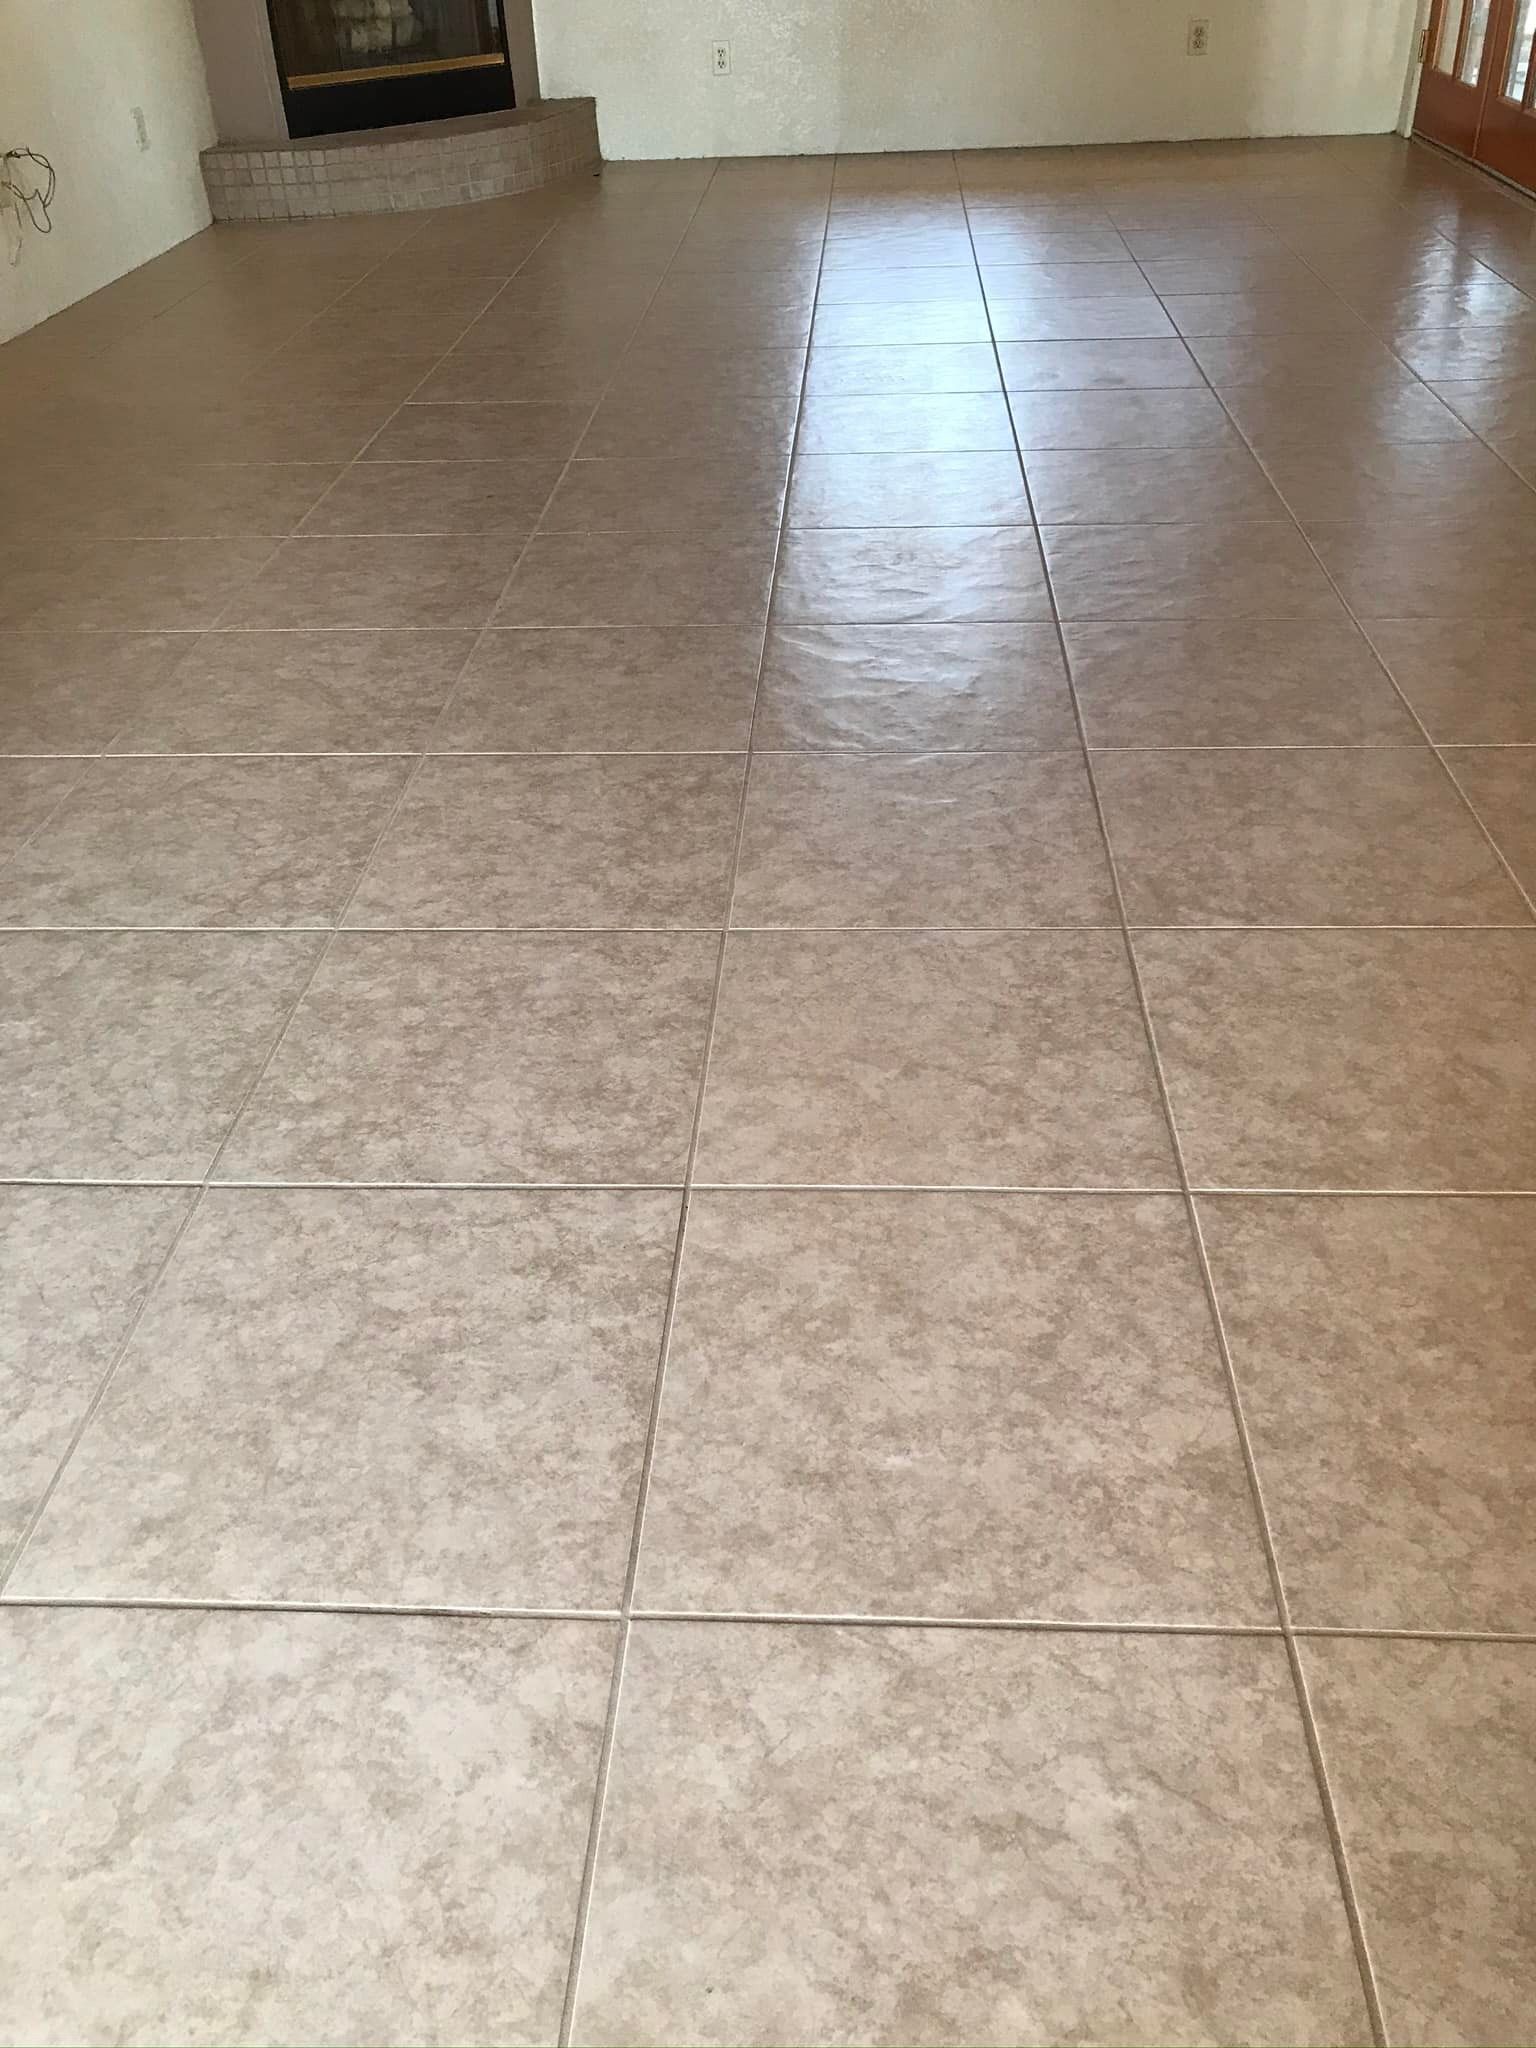 Tile cleaning for Superstition Carpet and Tile Care LLC in Apache Junction, AZ